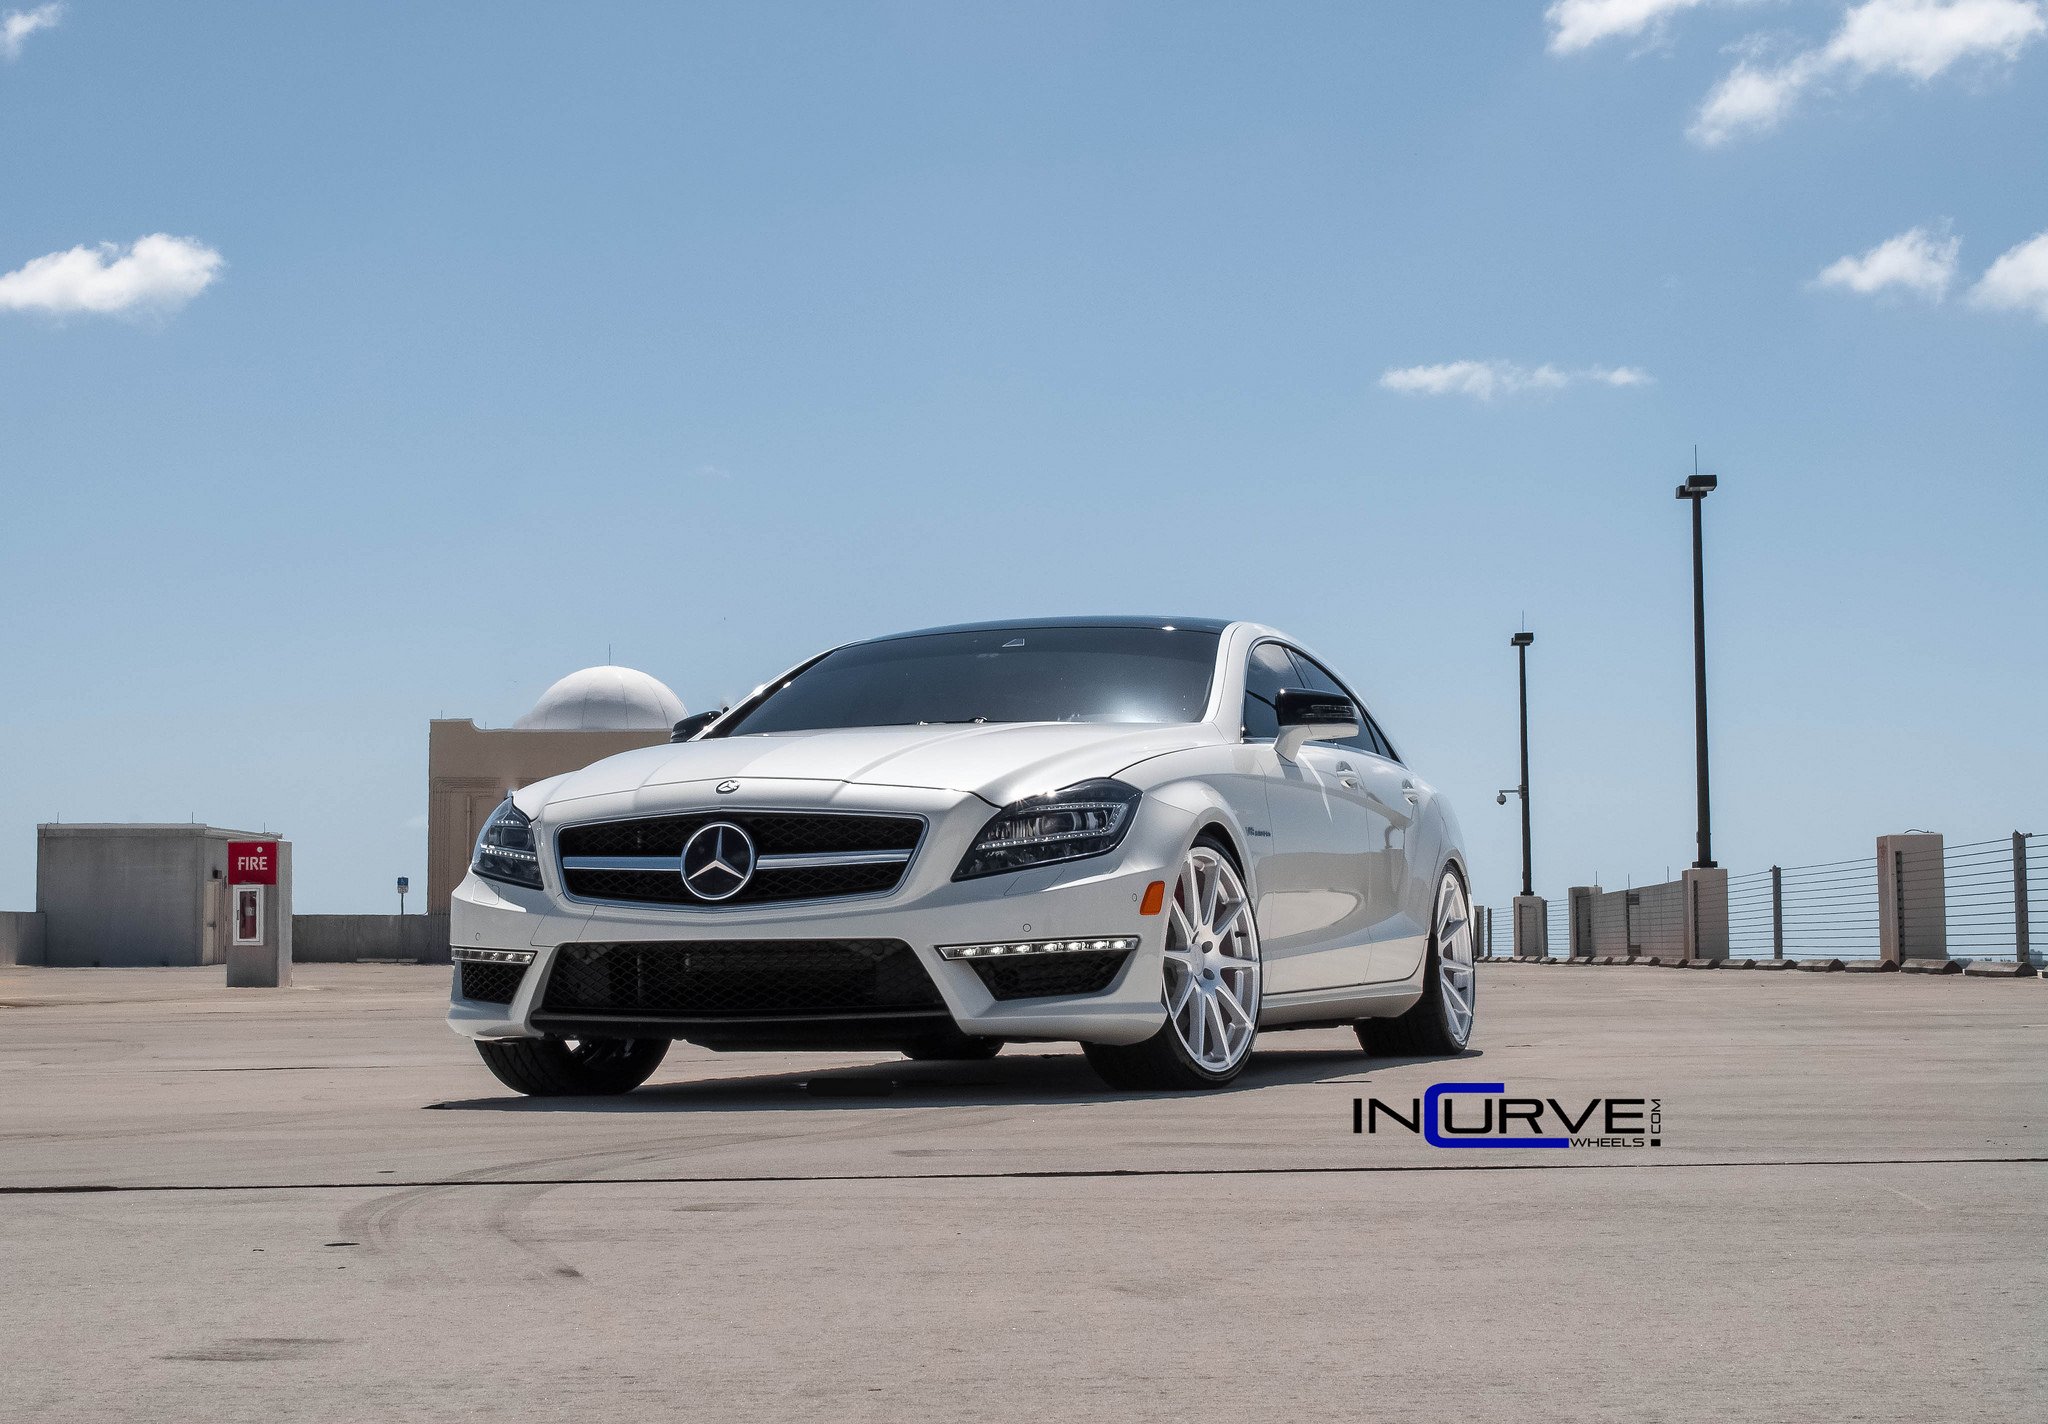 2015, Incurve, Wheels, Cars, Tuning, Cls63, Amg, Mercedes Wallpaper